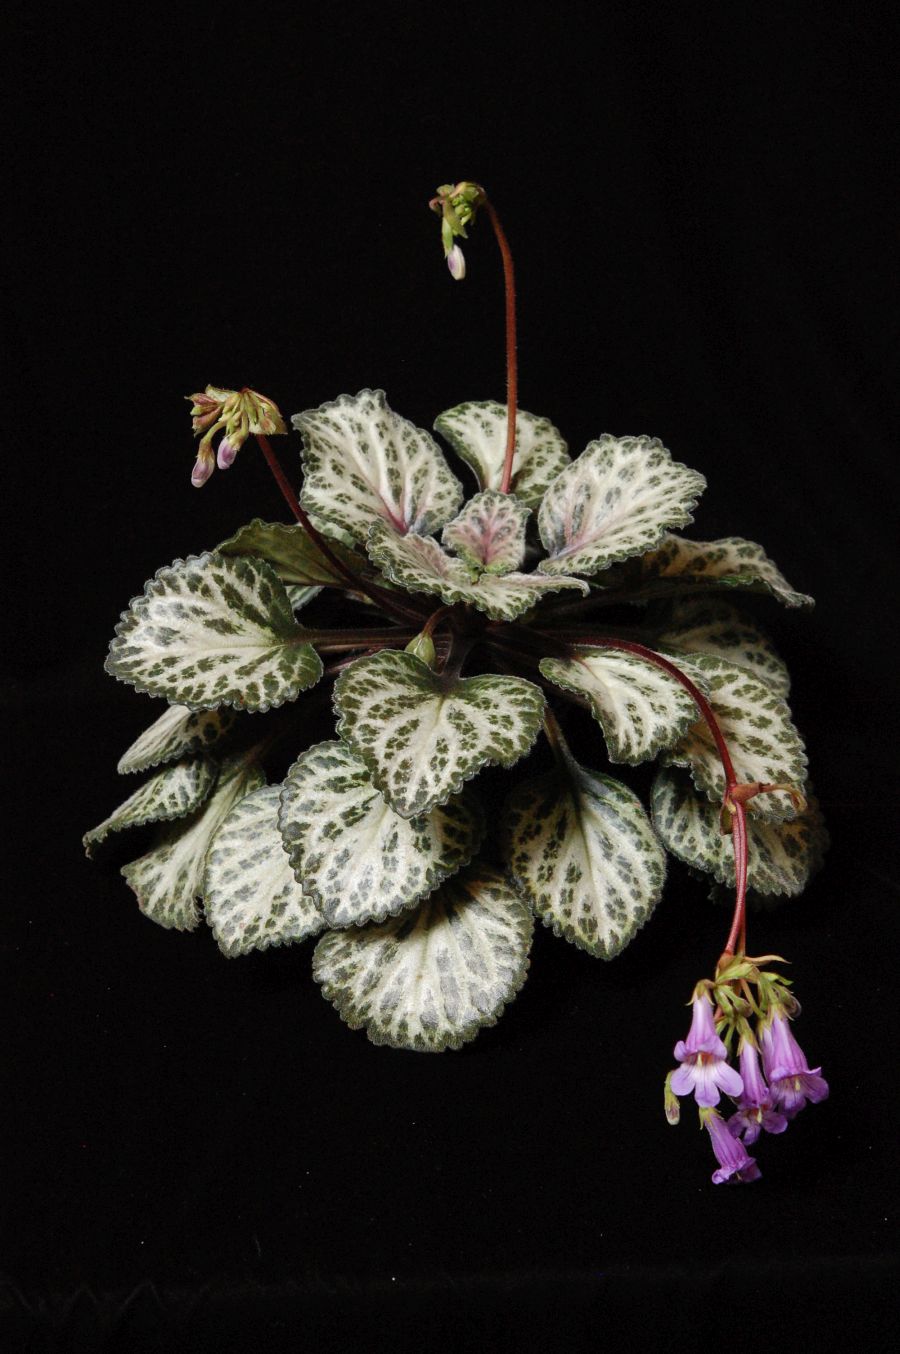 2017 Convention<br>Other Old World Gesneriads in Flower <br>Class 34 – <i>Primulina</i> hybrids<br>BEST PETER SHALIT HYBRID